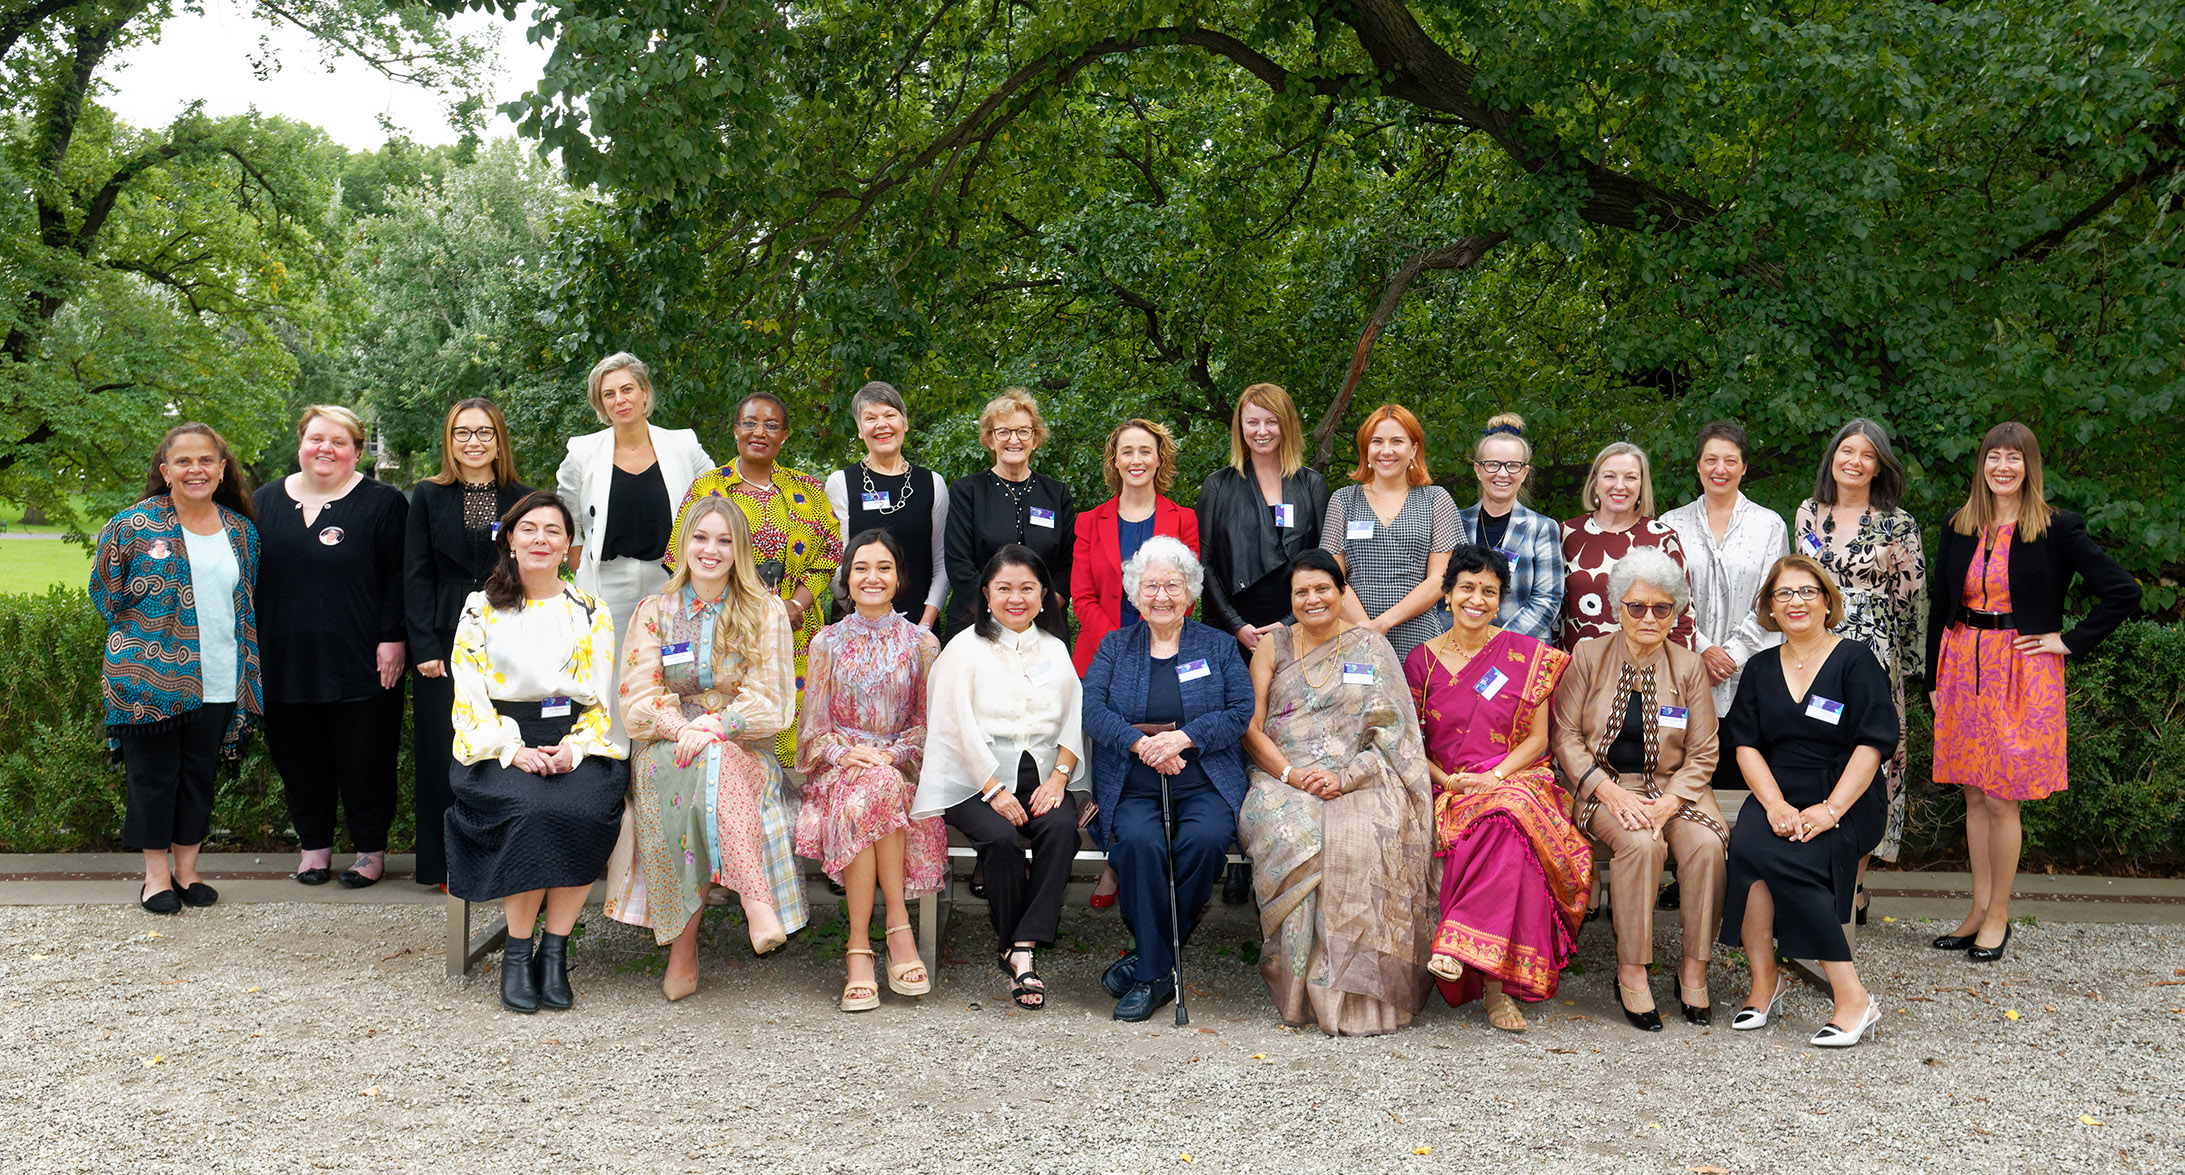 A diverse group of 23 women who were all inducted into the Victorian Honour Roll of Women